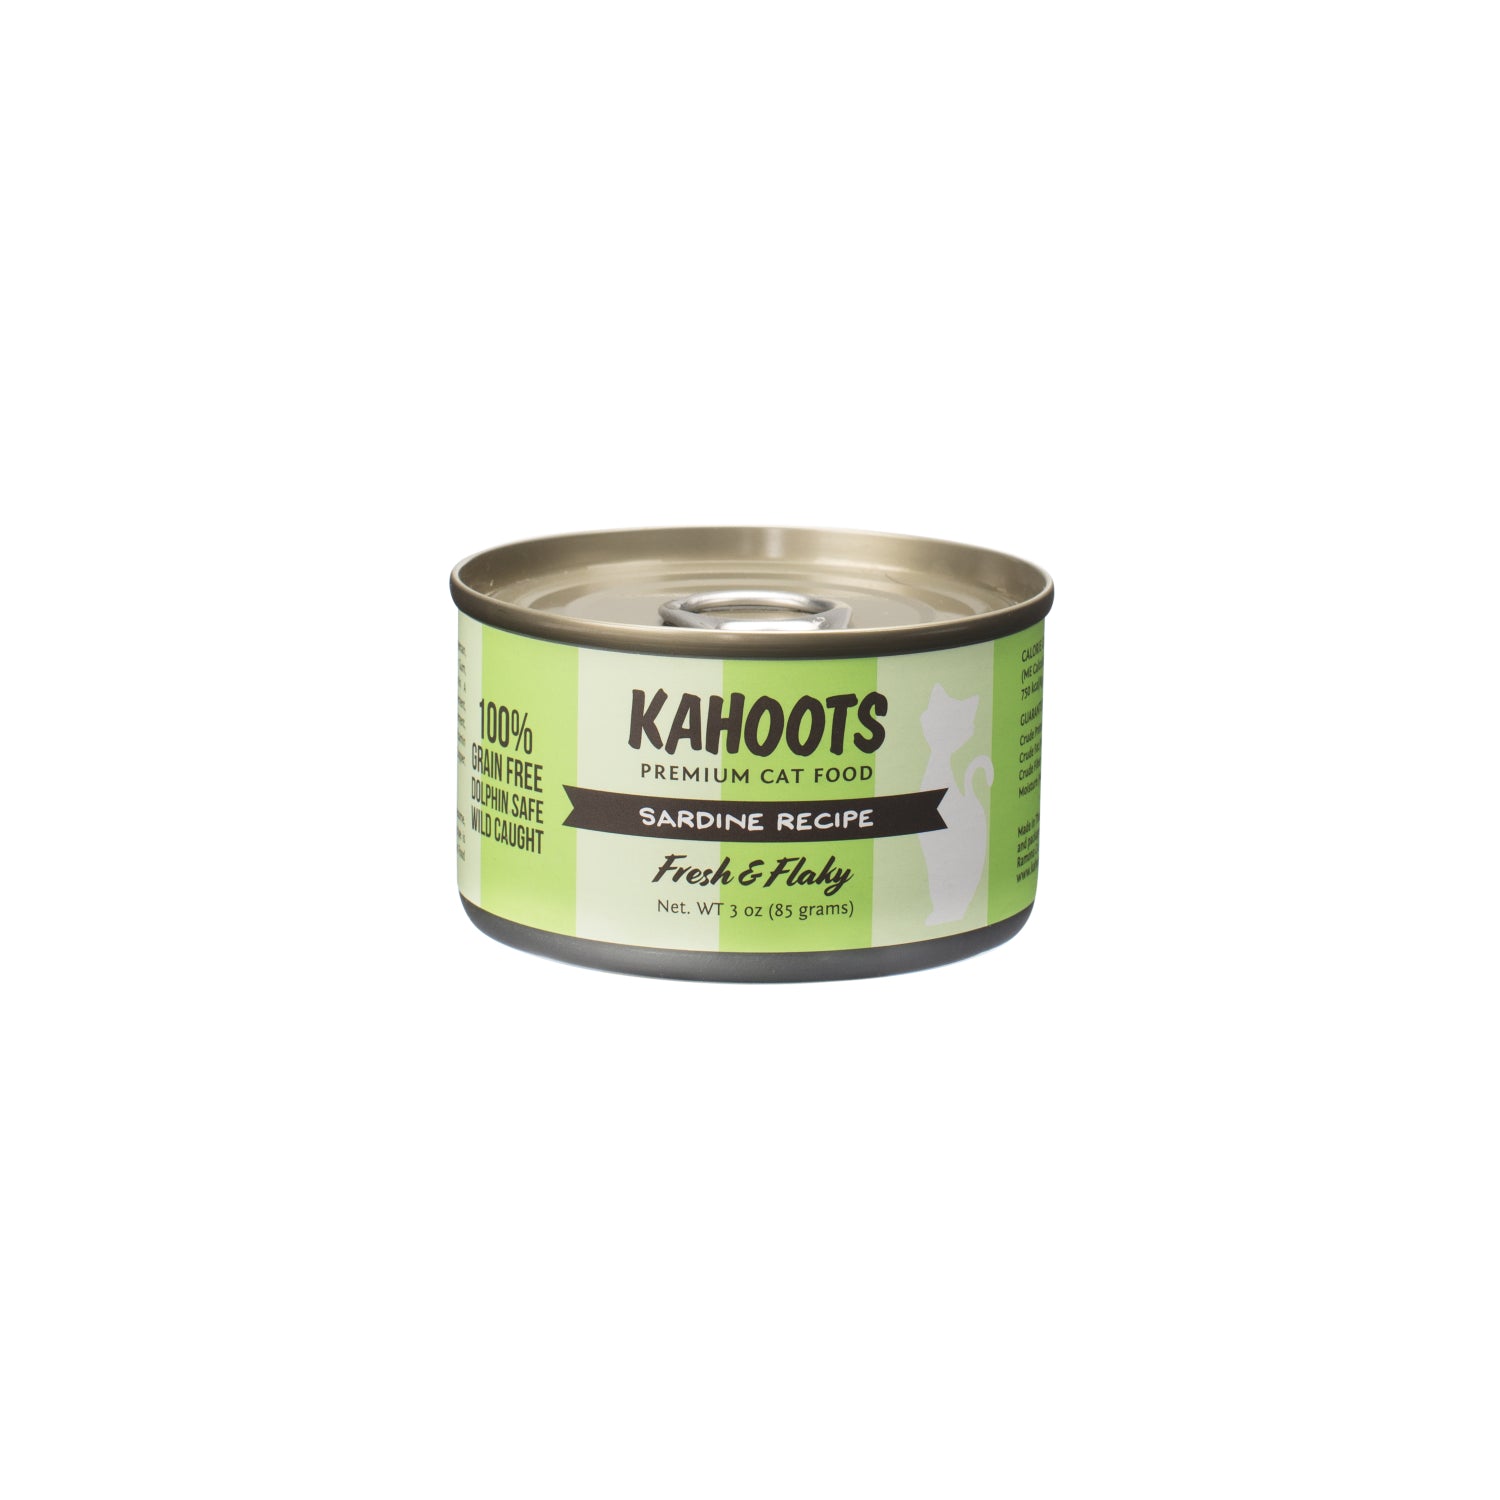 Sardine wet cat food. White cat over green colored striped background on the label